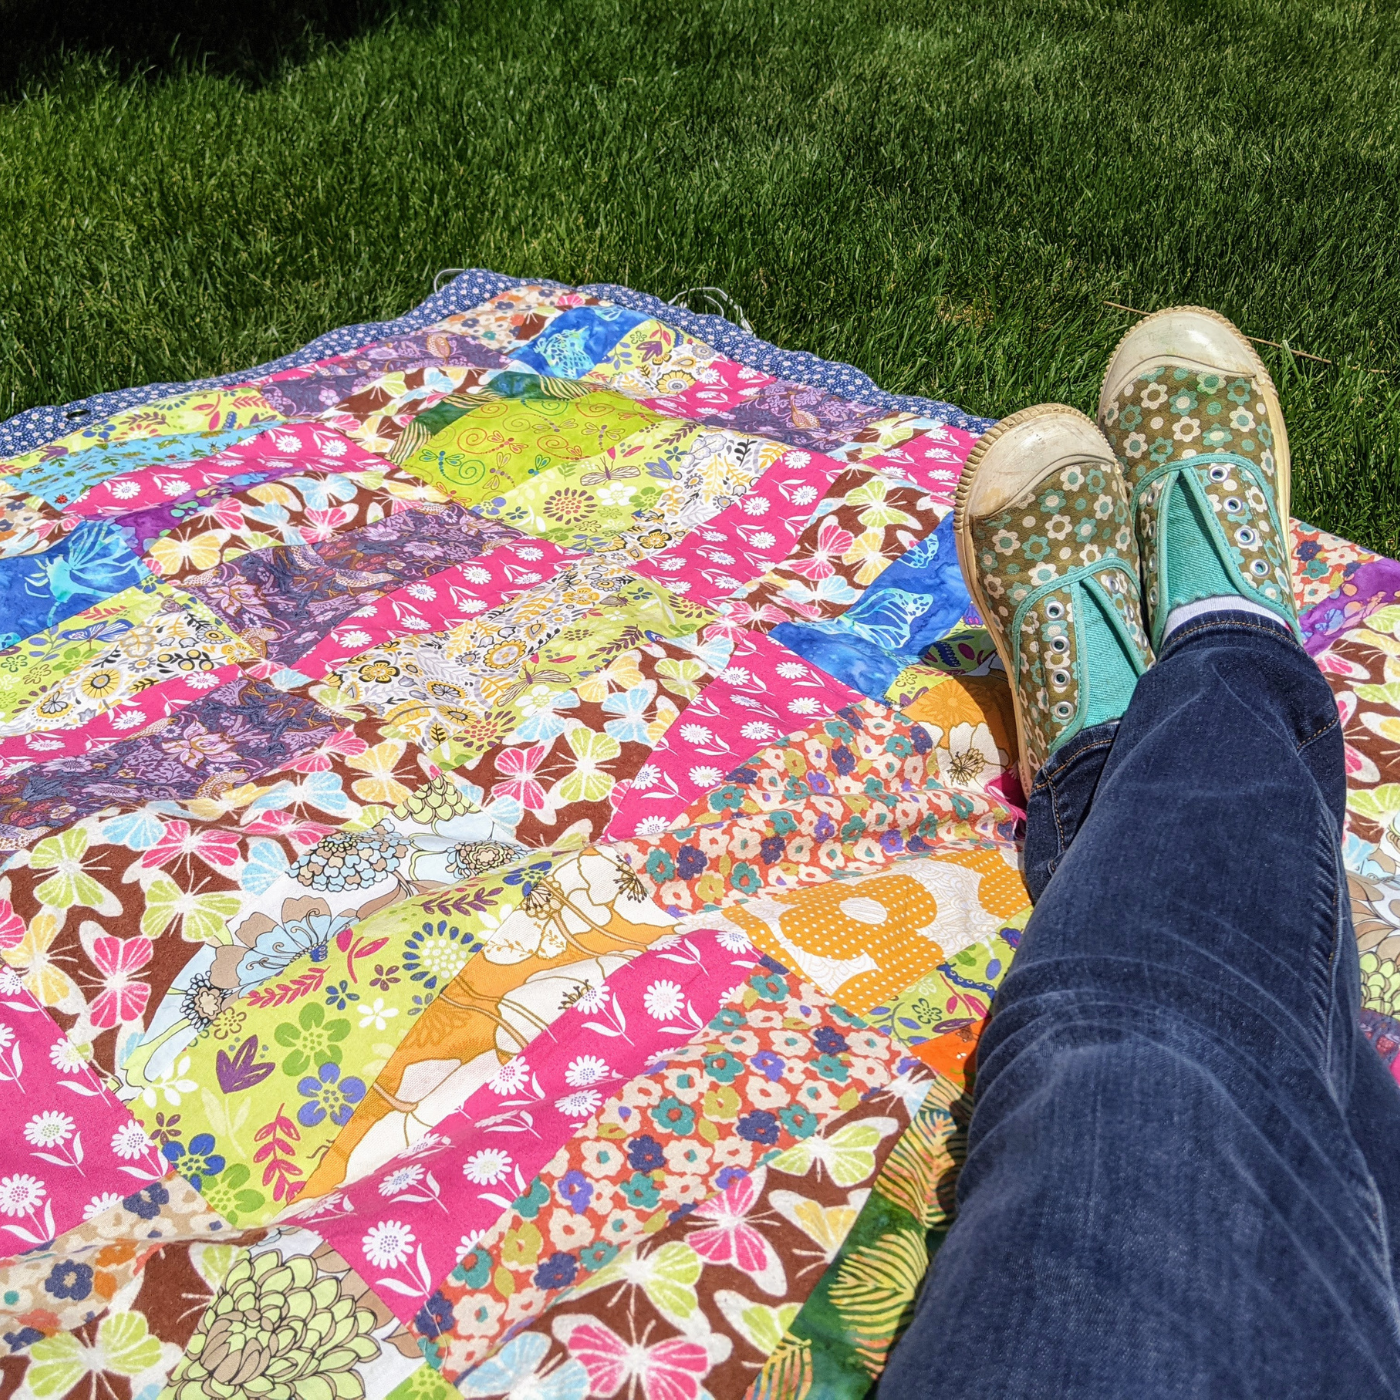 A colorful patchwork blanket rests on a bed of grass. Two legs extend into the lower right handside of the blanket, wearing jeans and green-and-blue floral print shoes.